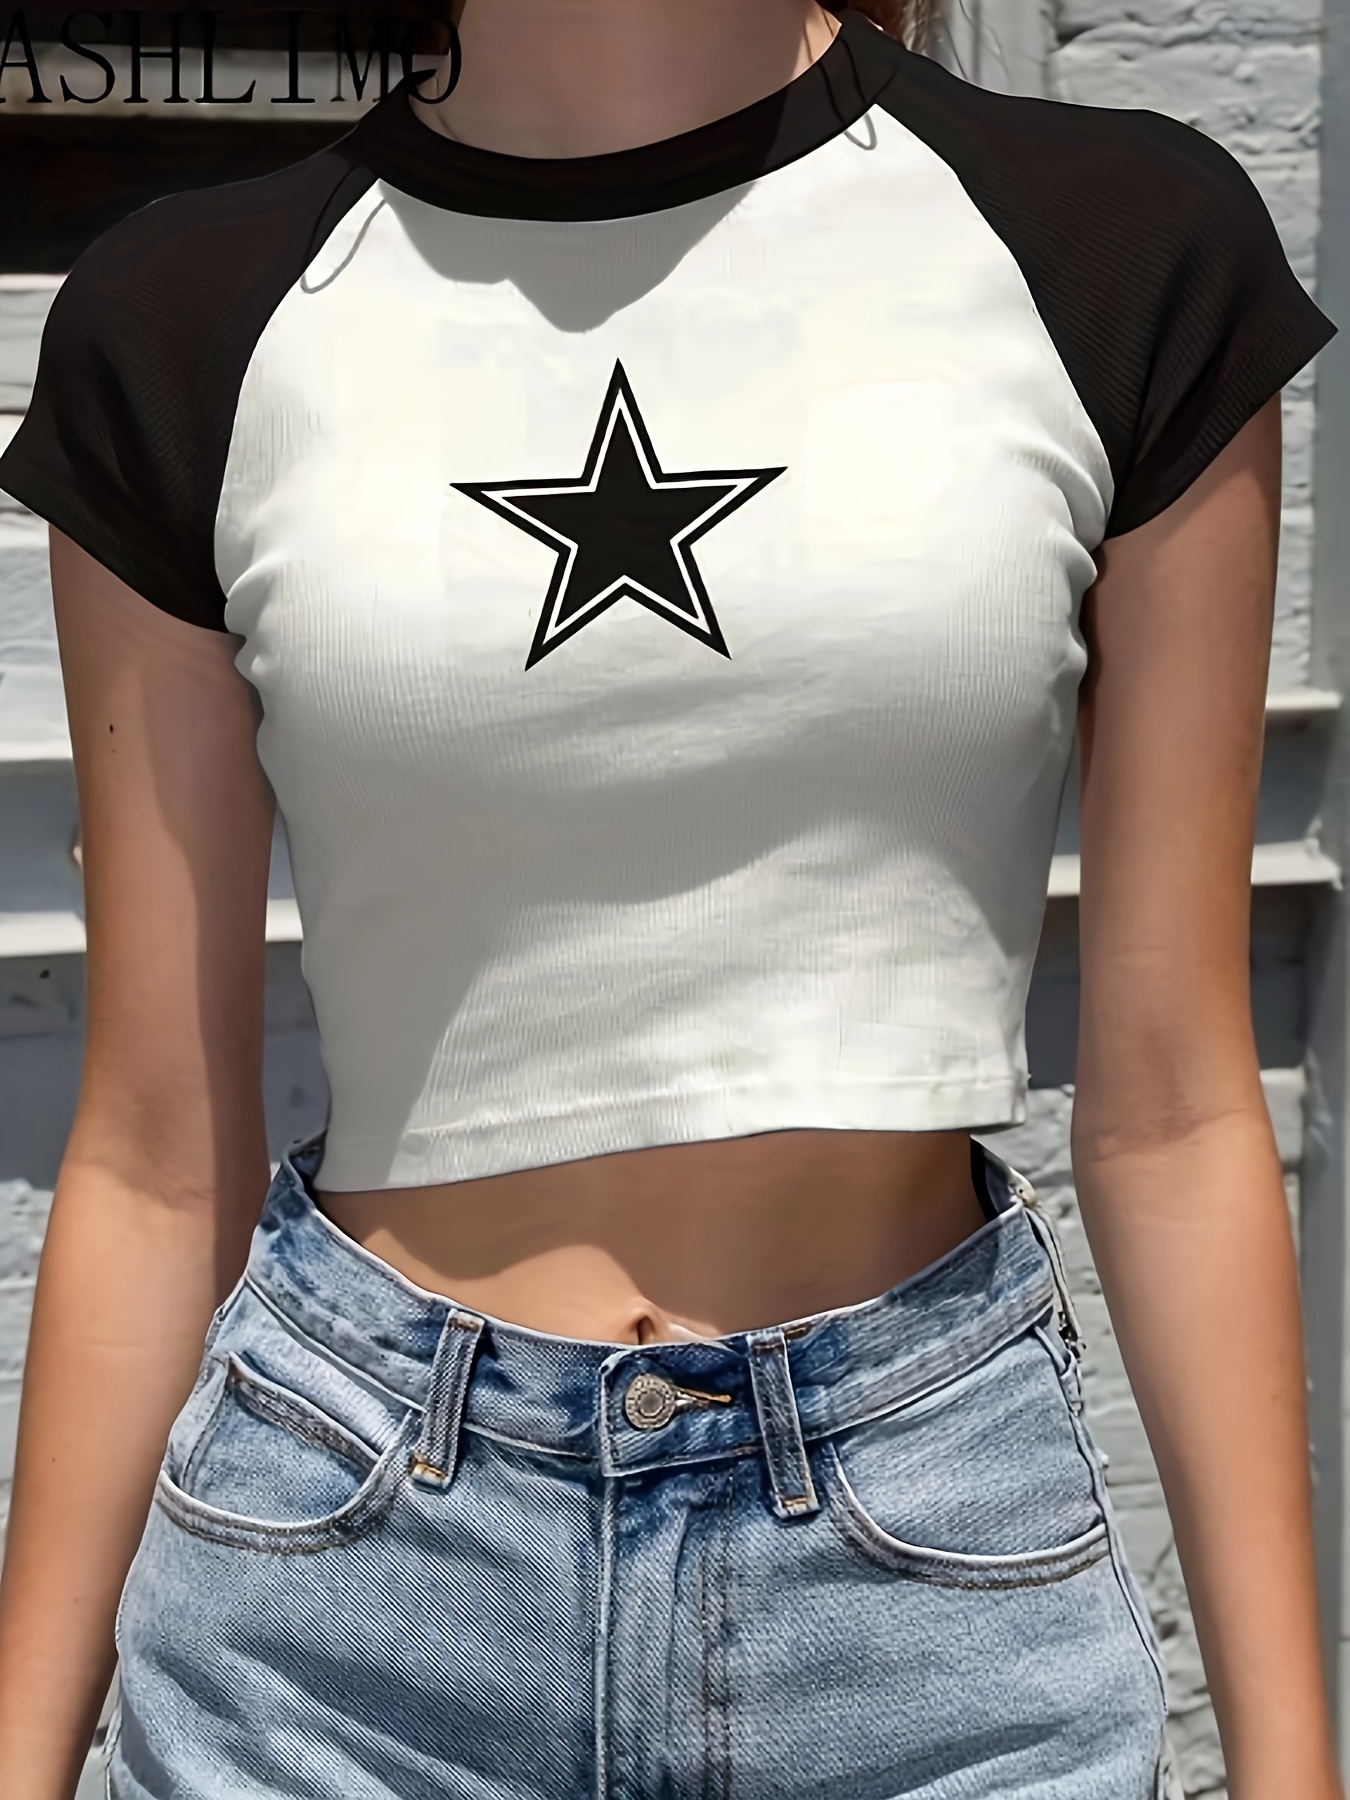 Women's Tops, Cropped Tops & Tees